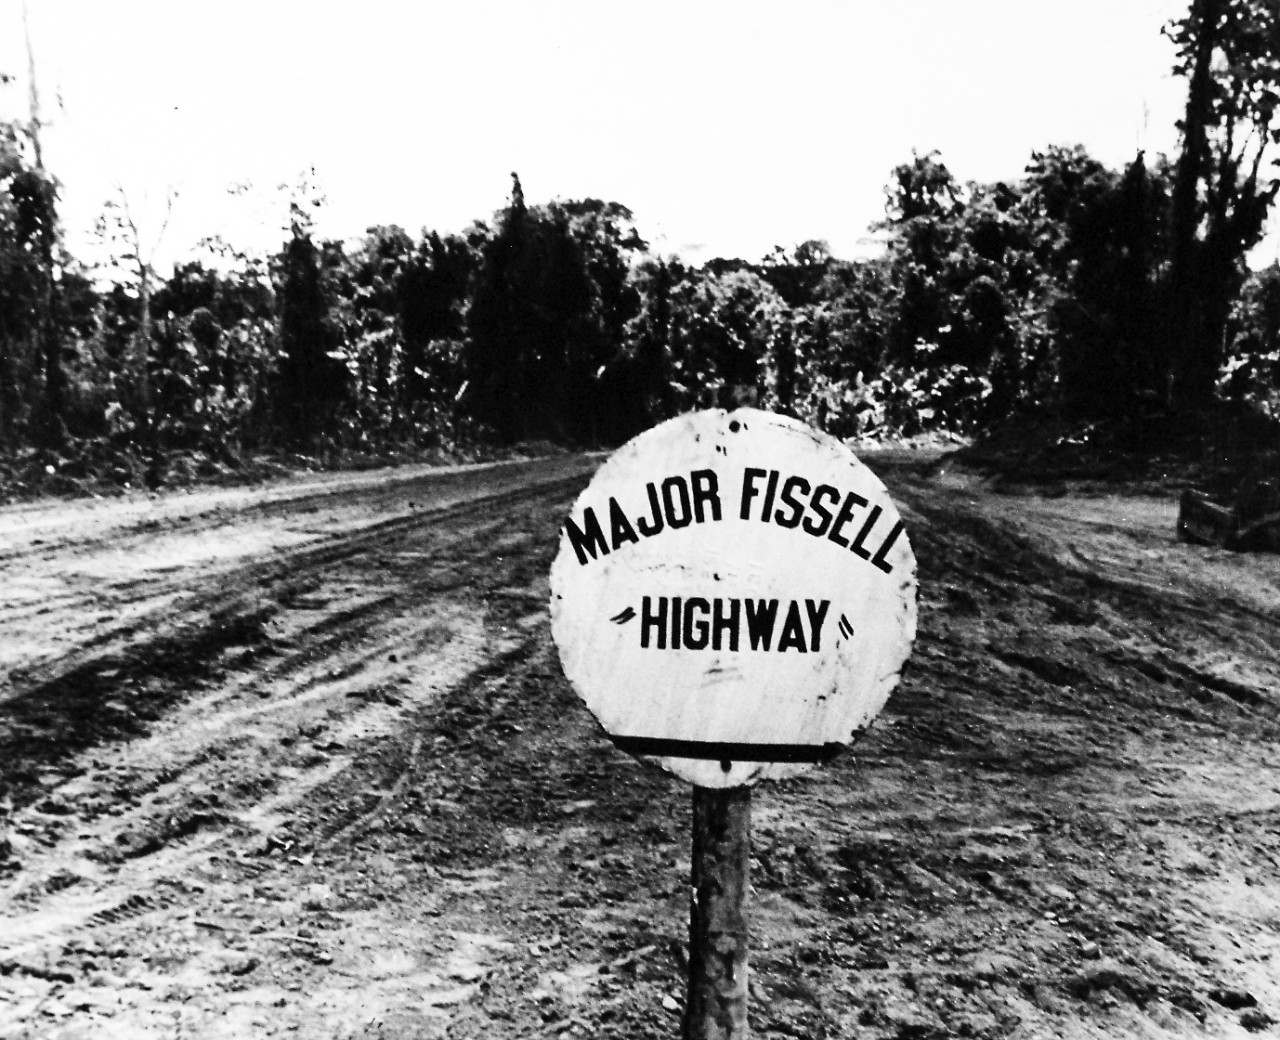 80-G-207831:  Bougainville Campaign, November 1943-August 1945.   This highway, hacked through the heavy Bougainville jungle, was dedicated to Marine Major Glenn Fisssell, who gave his life in an effort to rescue a wounded enlisted man during “The Coconut Grove Battle,” November 1943.  Photograph released January 14, 1944.   Official U.S. Navy photograph, now in the collections of the National Archives.  (2016/06/21).